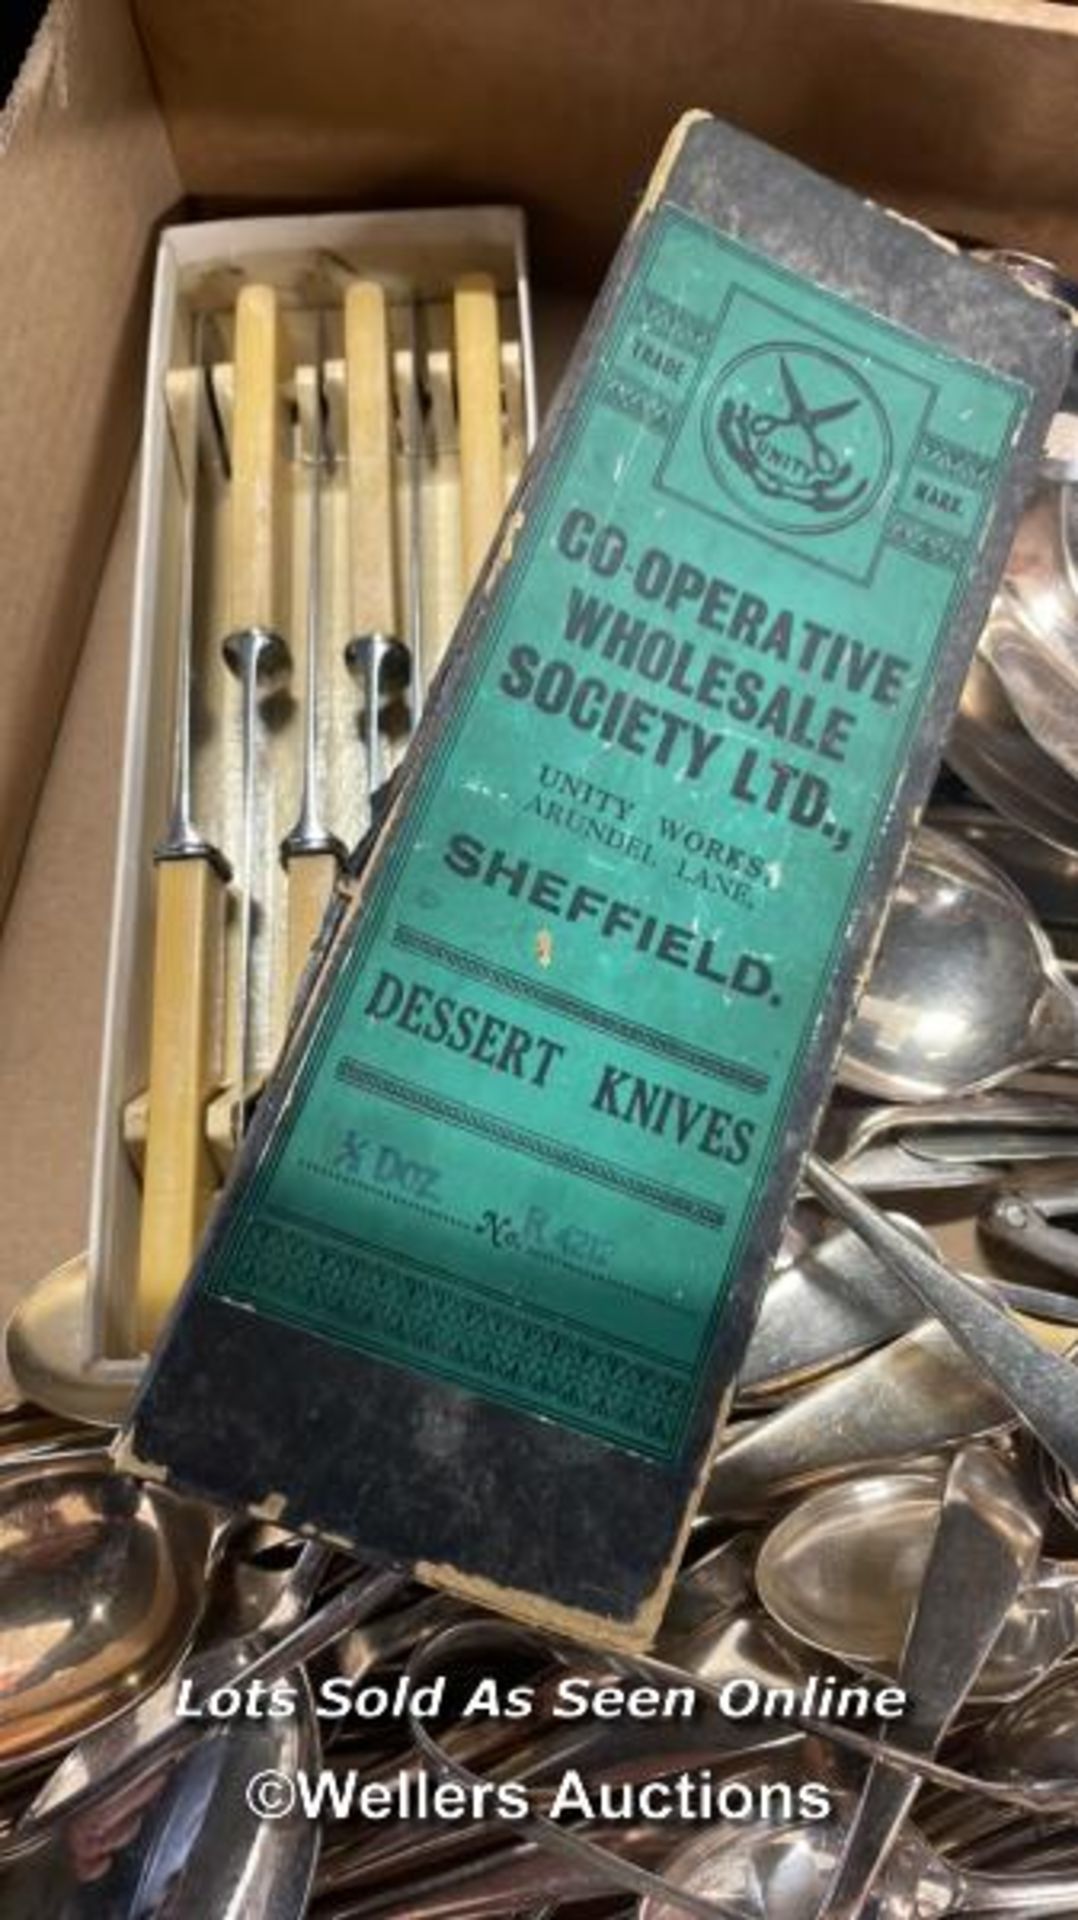 VINTAGE CUTLERY INCLUDING BOXED DESSERT KNIVES AND SUGAR NIPS - Image 5 of 6